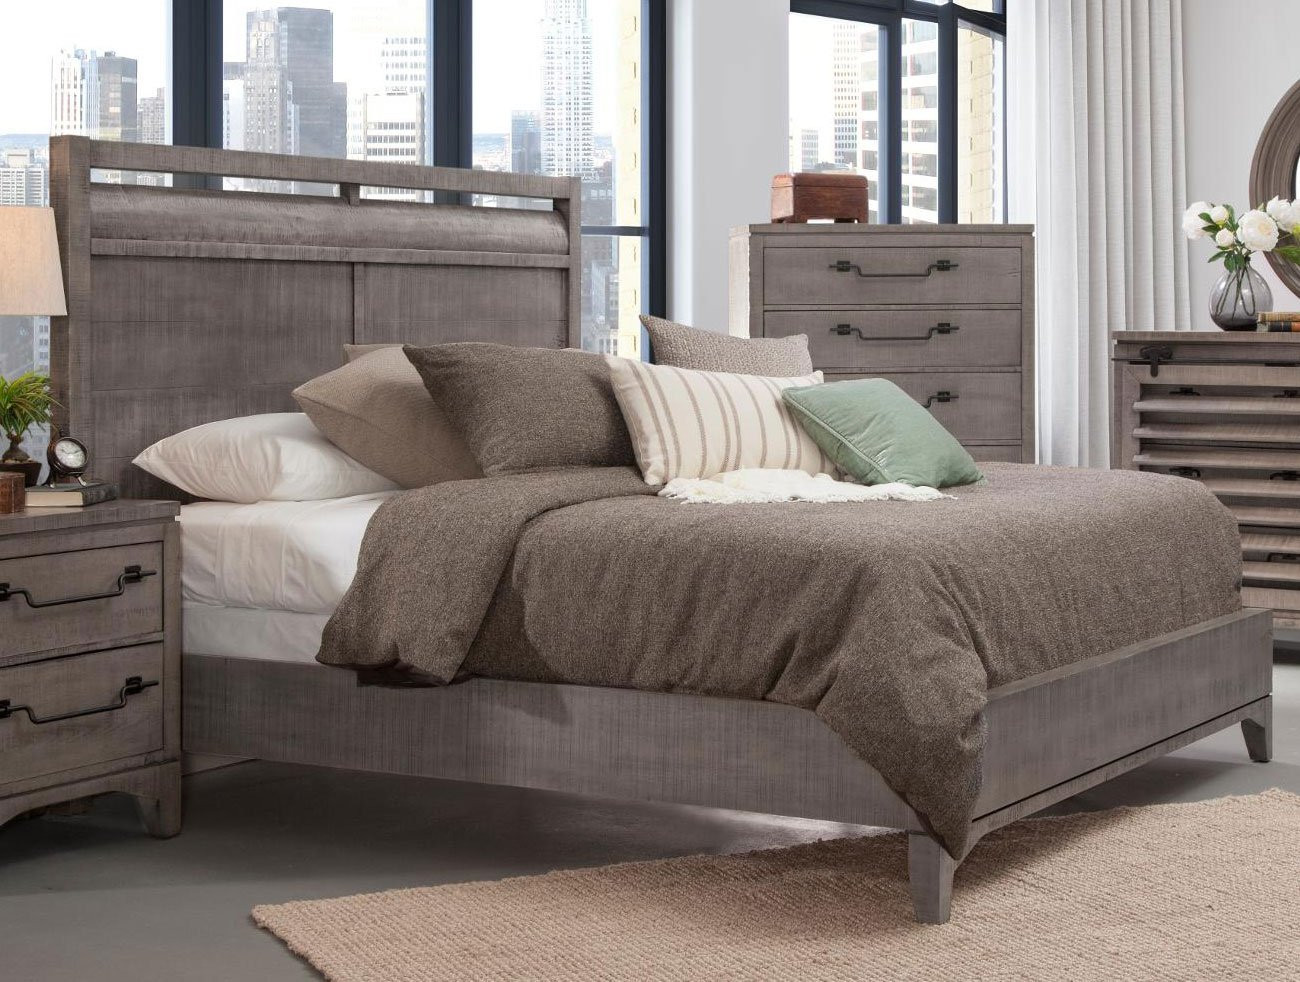 Rustic King Size Bedroom Sets
 Rustic Contemporary Old Gray 6 Piece King Bedroom Set